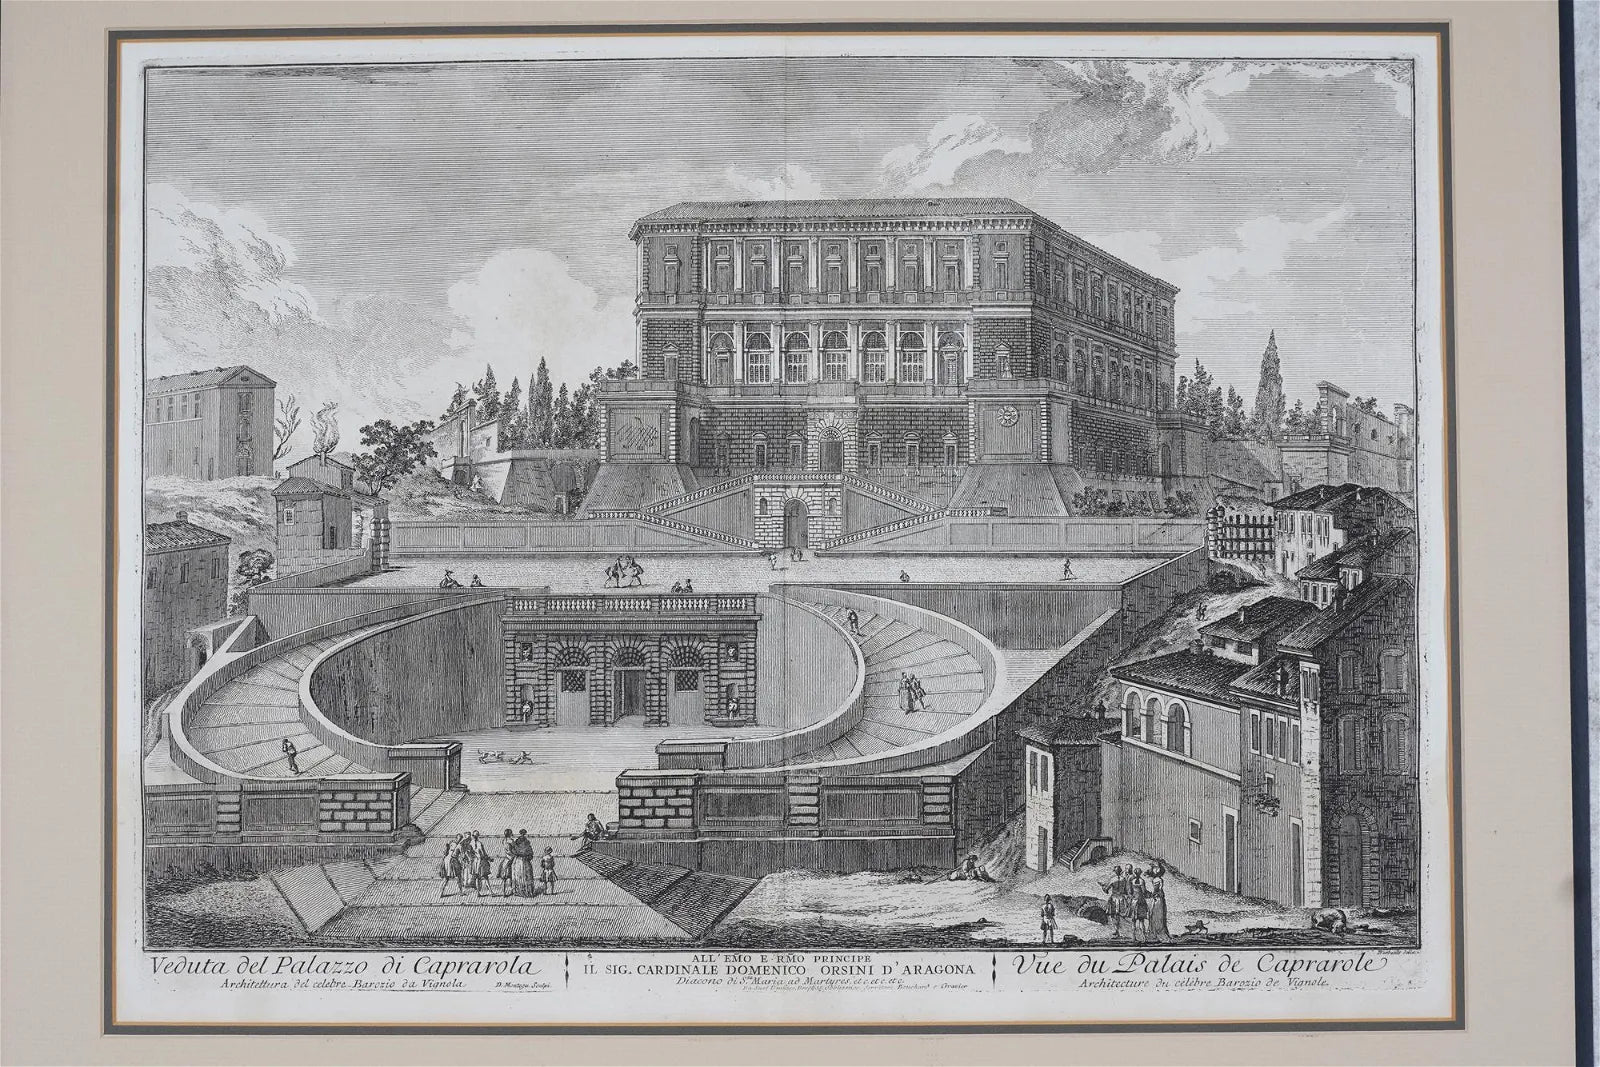 AW7-010: JEAN BARBAULT - SET OF 5 ANTIQUE ENGRAVINGS - VIEWS OF 18TH CENTURY ROME